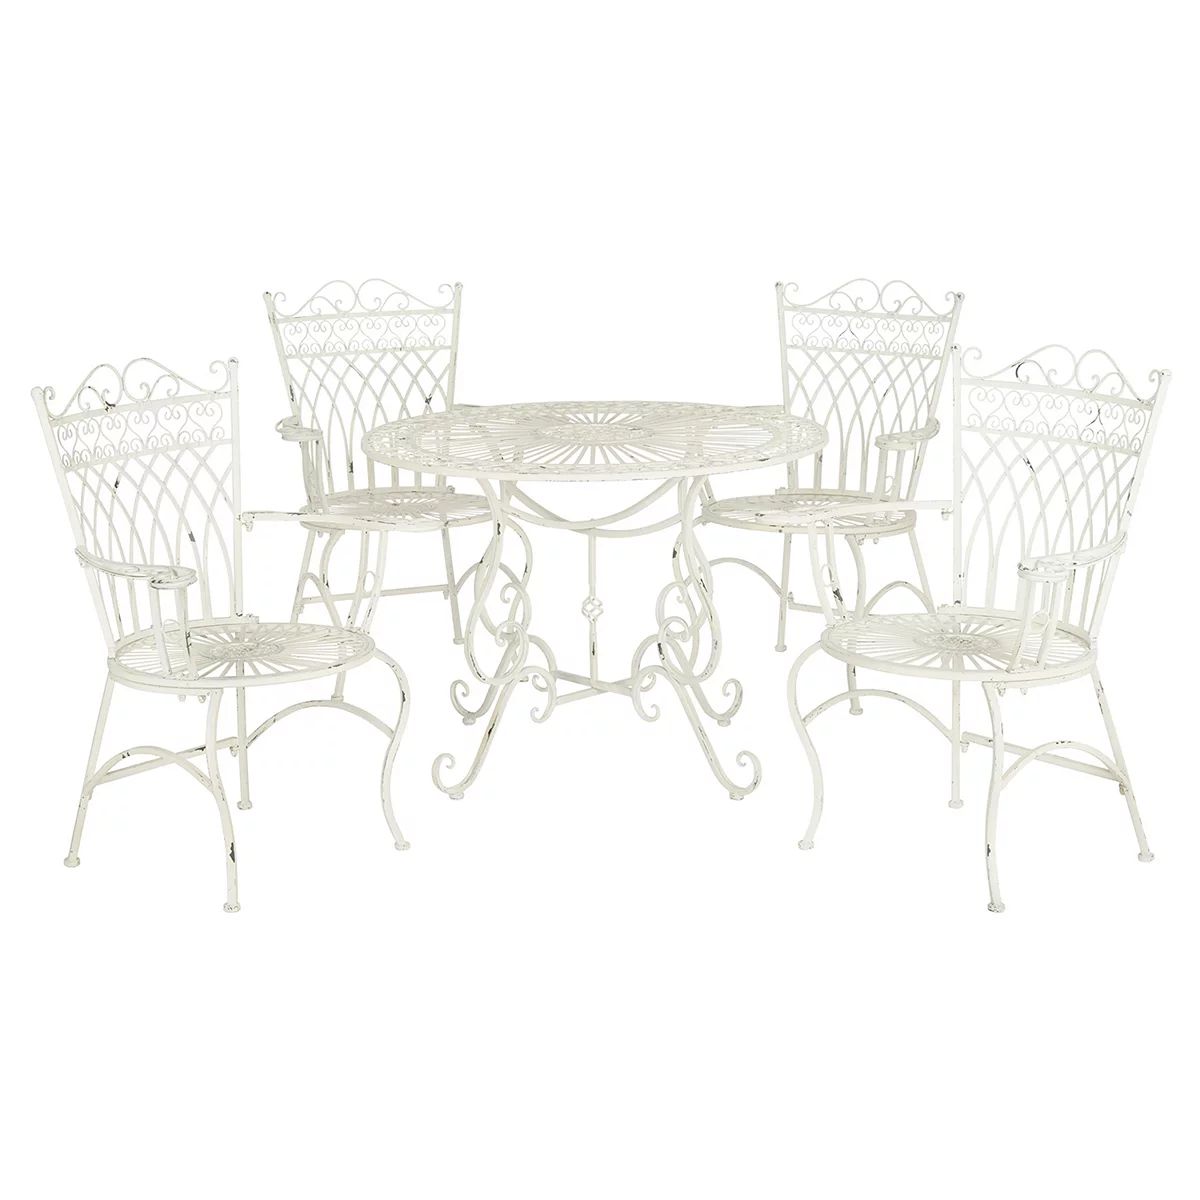 Safavieh Thessaly Patio Chair & Table 5-piece  Set | Kohl's